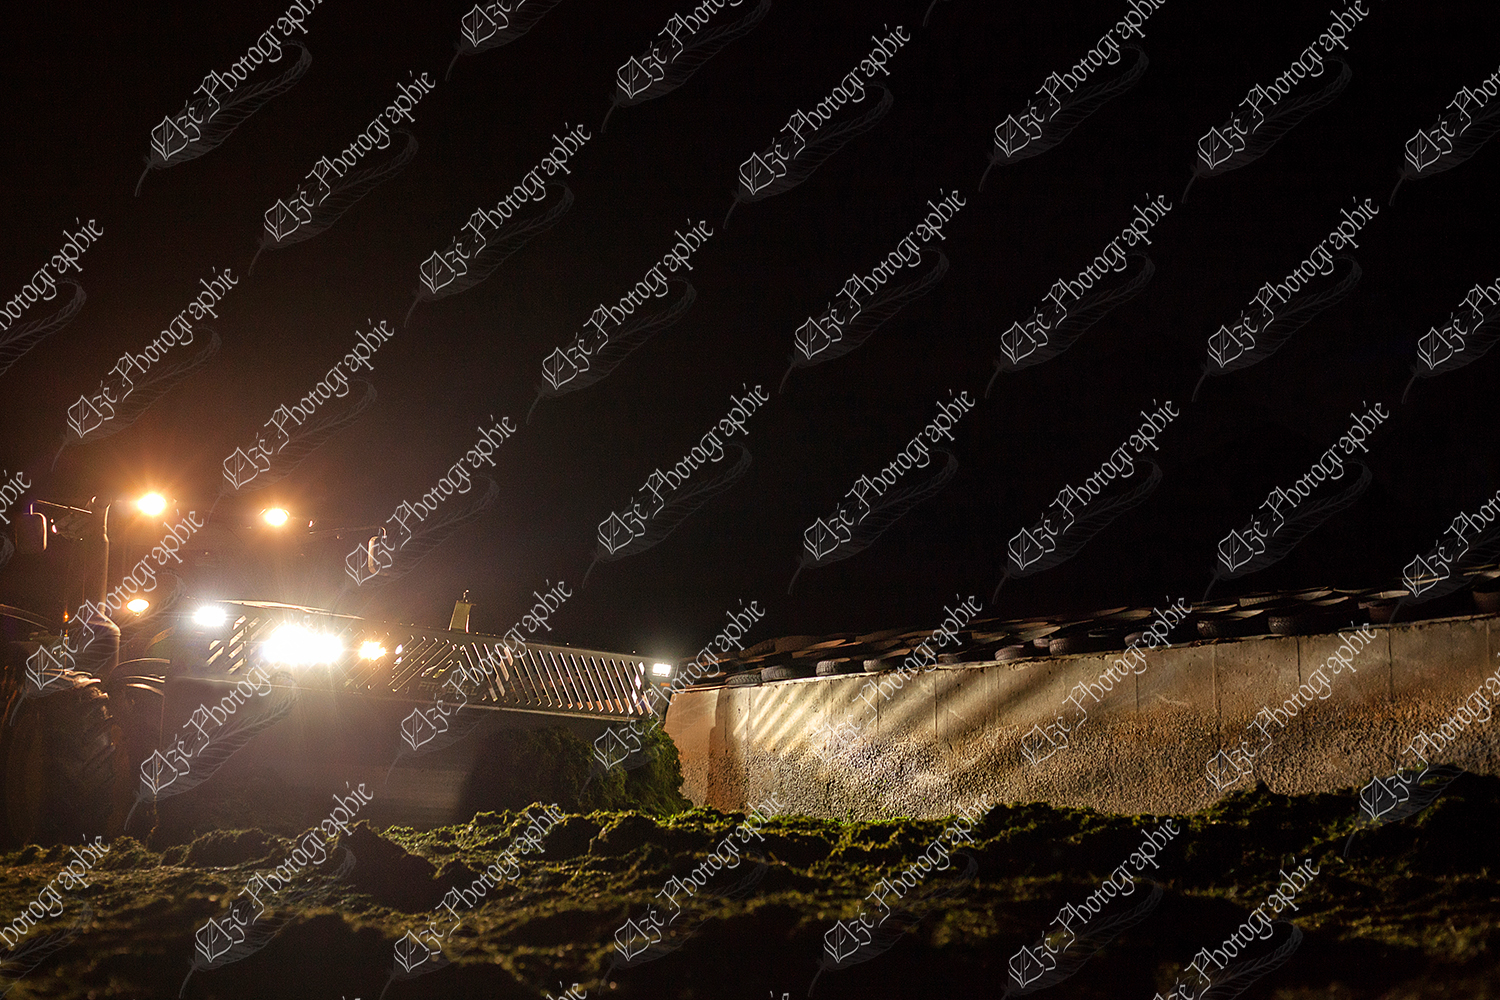 elze_photo_9774_tracteur_alimentation_animal_ensilage_tractor_cow_food